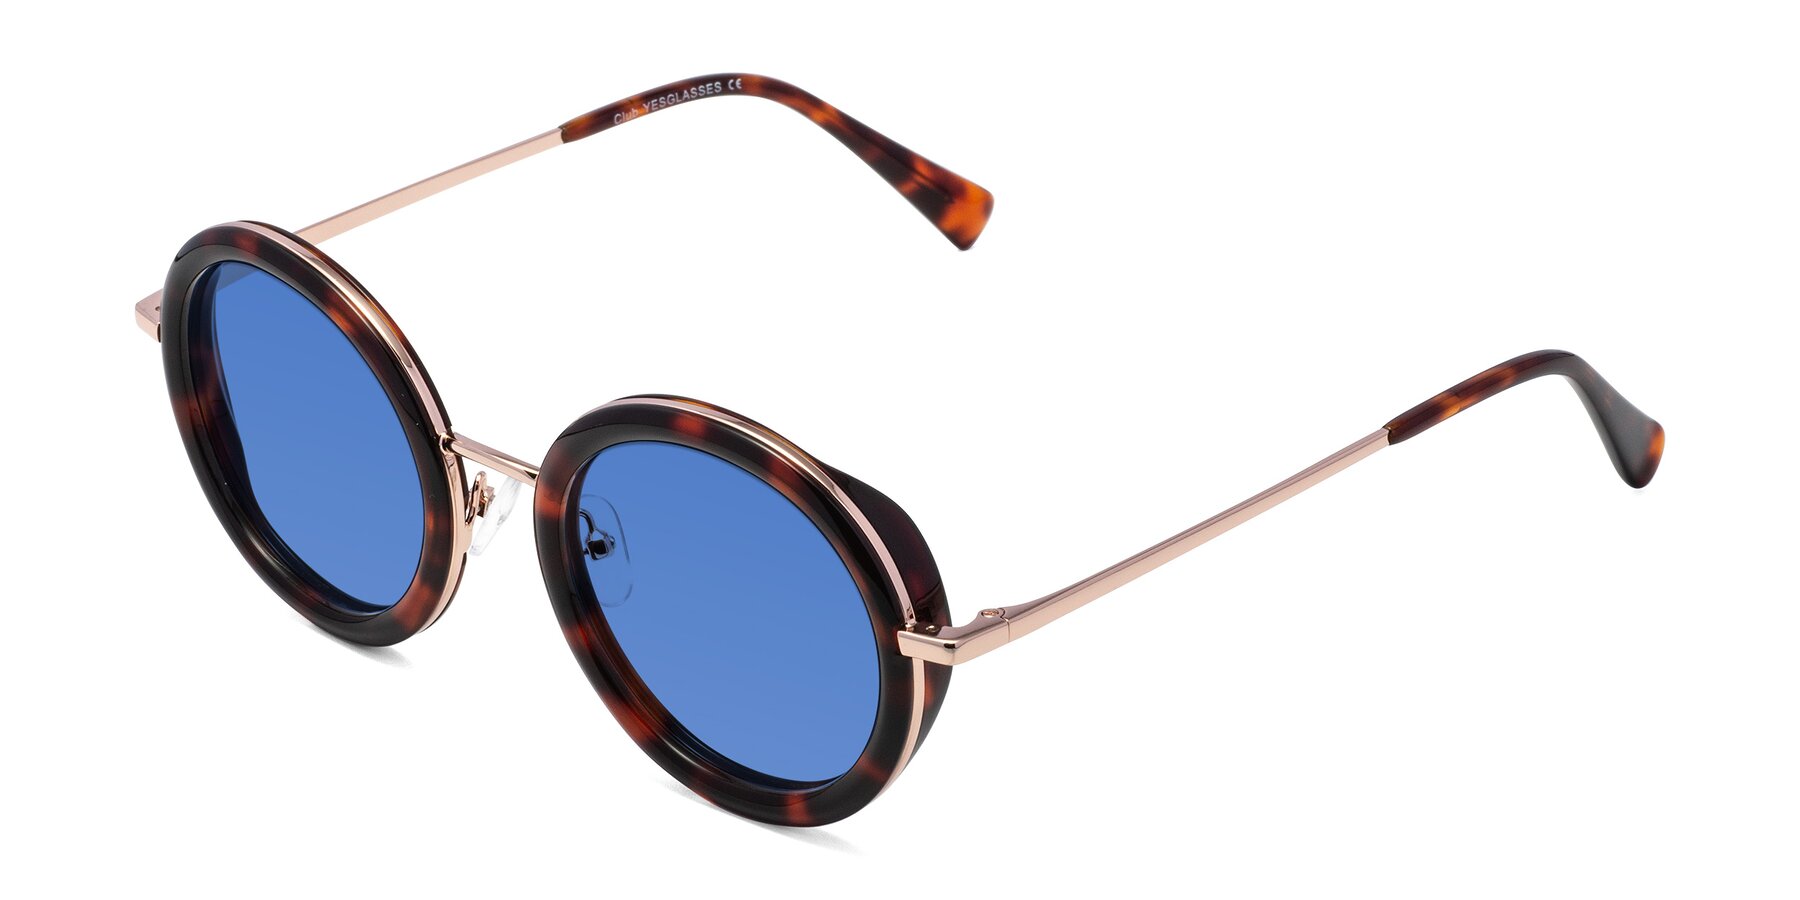 Angle of Club in Tortoise-Rose Gold with Blue Tinted Lenses